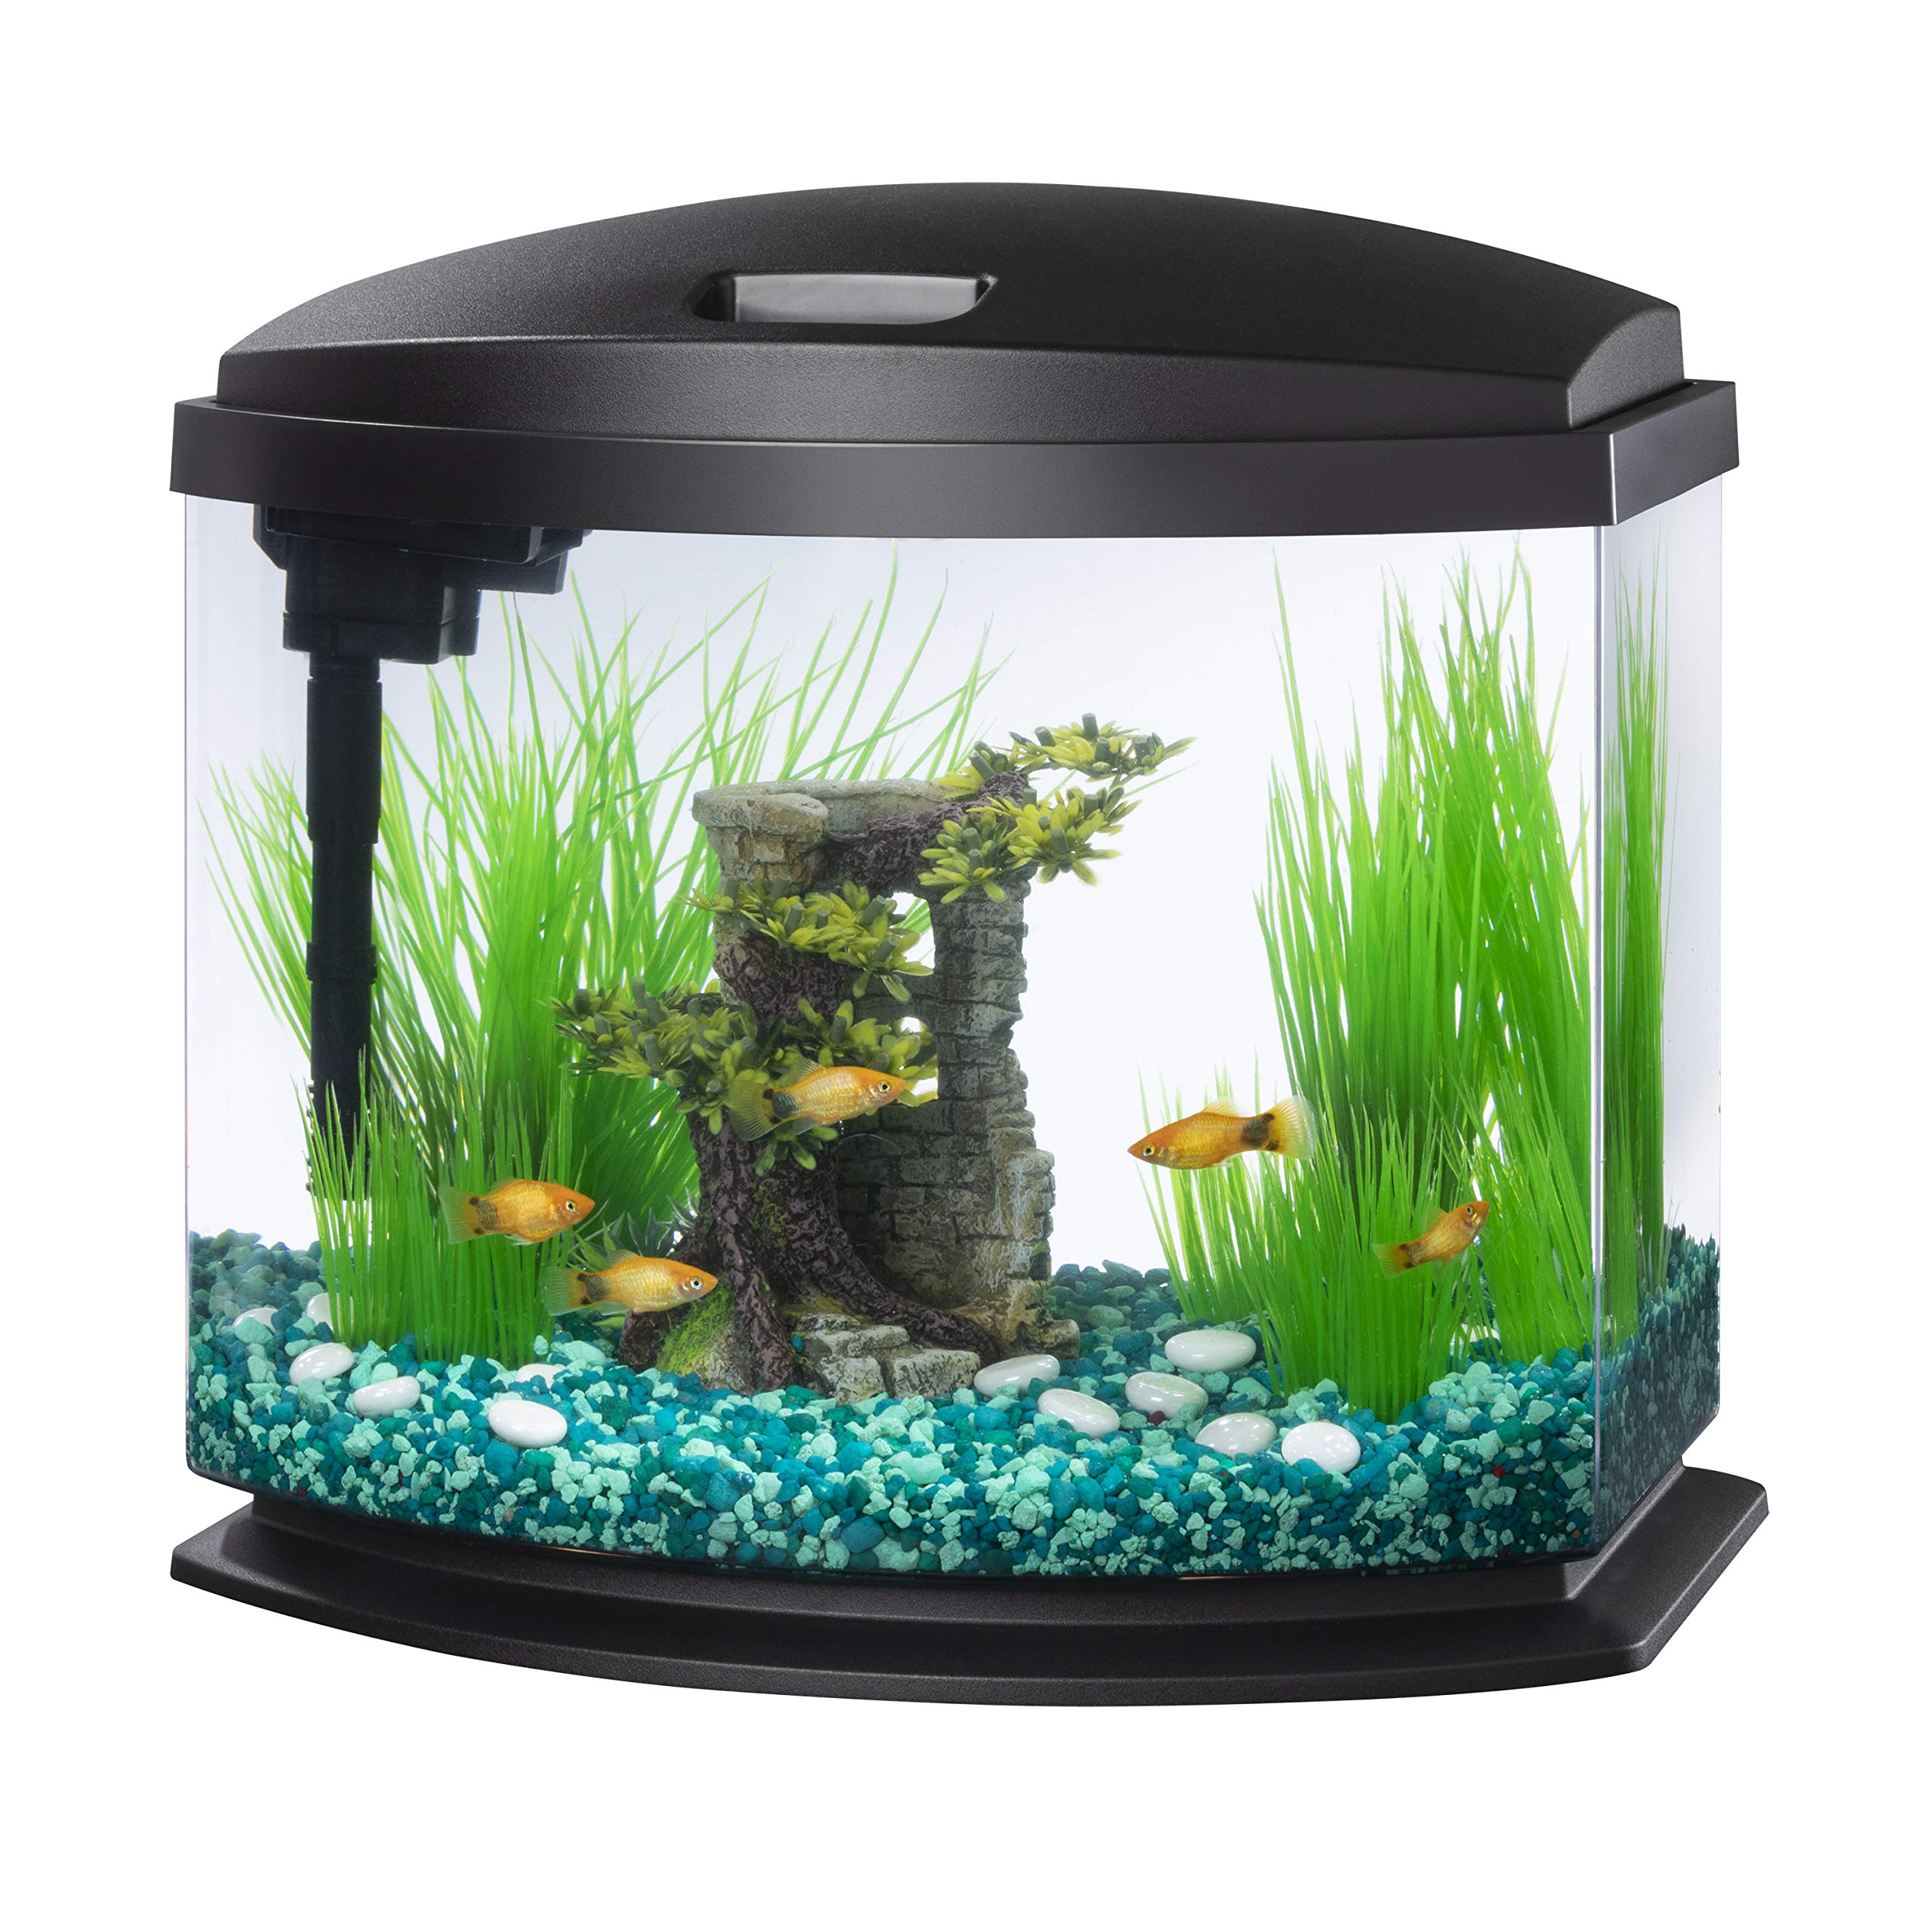 Looking to Buy The Best 10 Gallon Aquarium Kit. Read This First